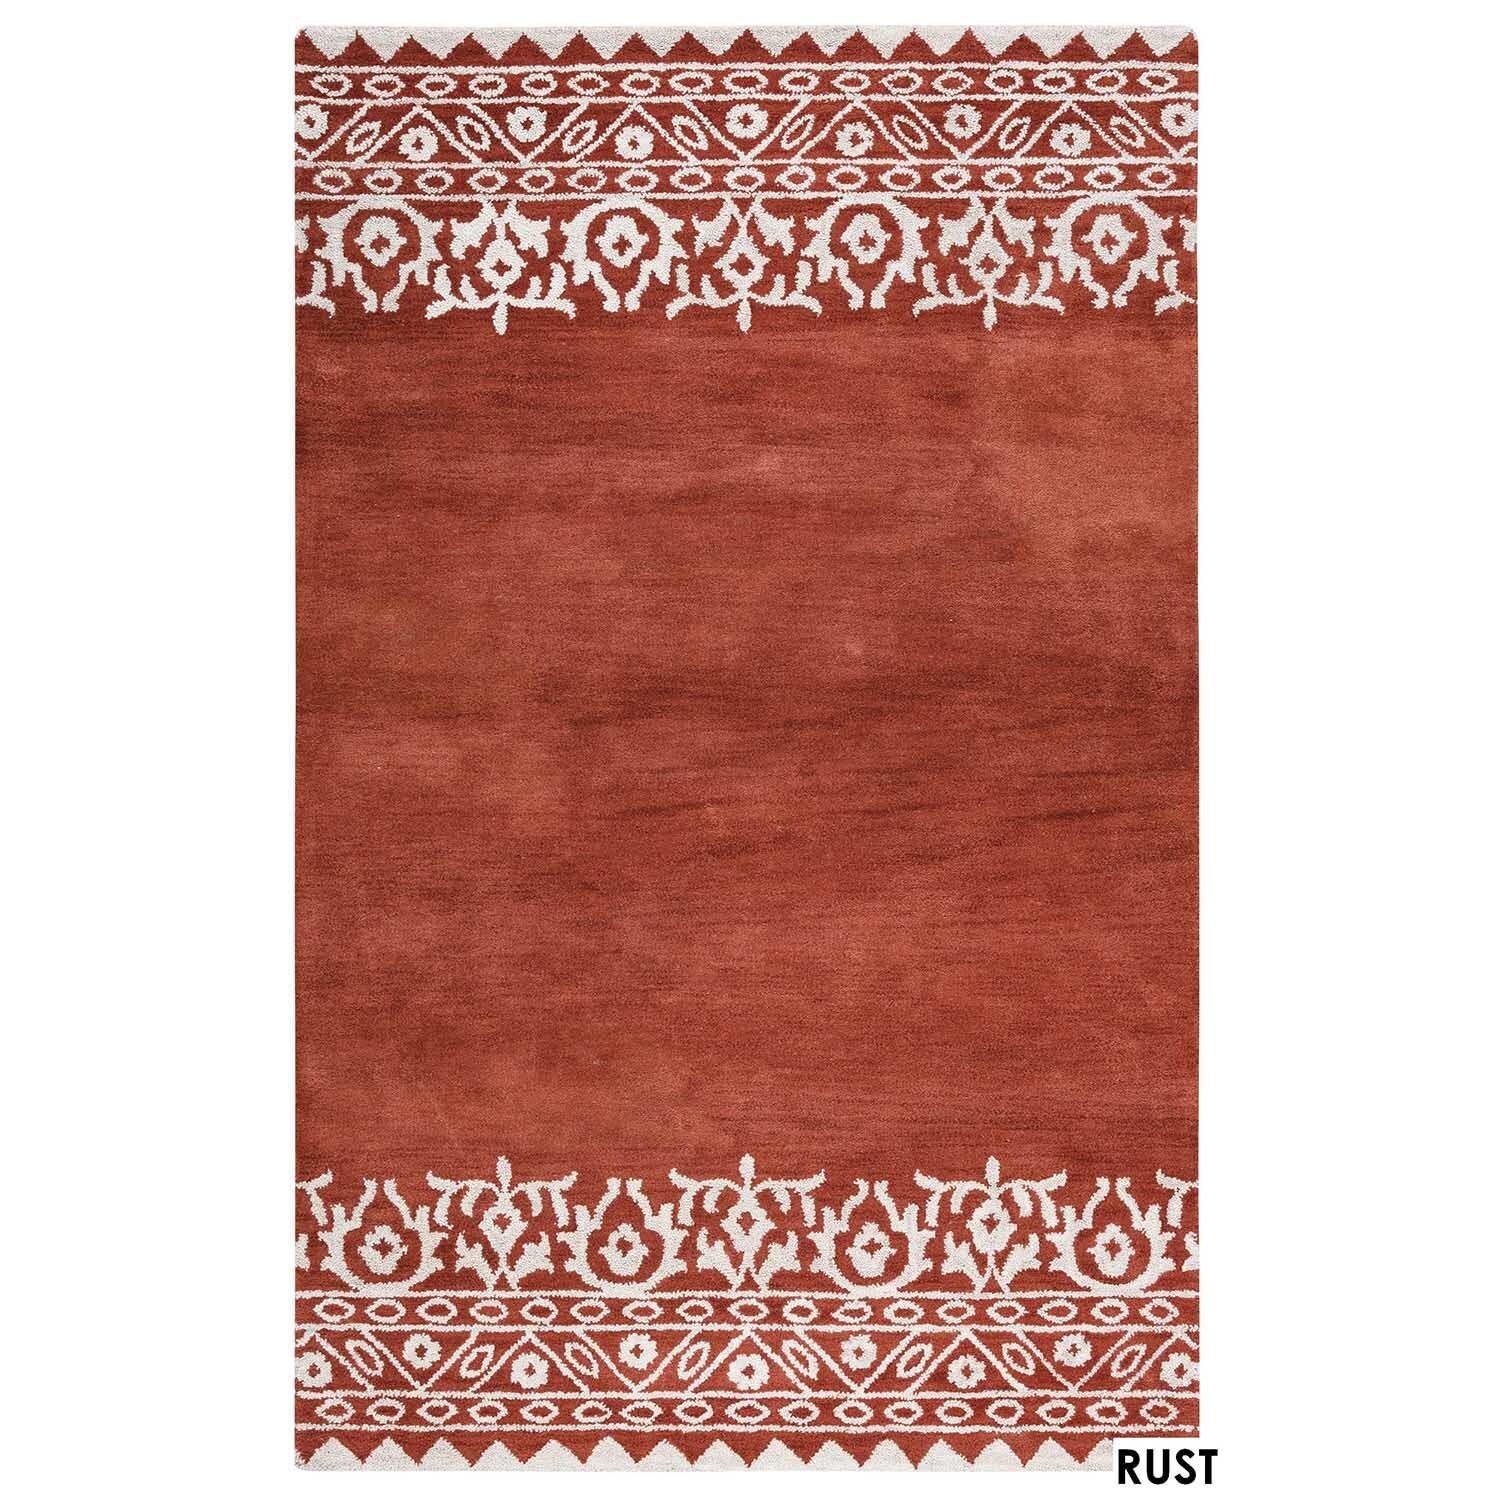 Buy Orange 9 X 12 Area Rugs Online At Overstockcom Our Best